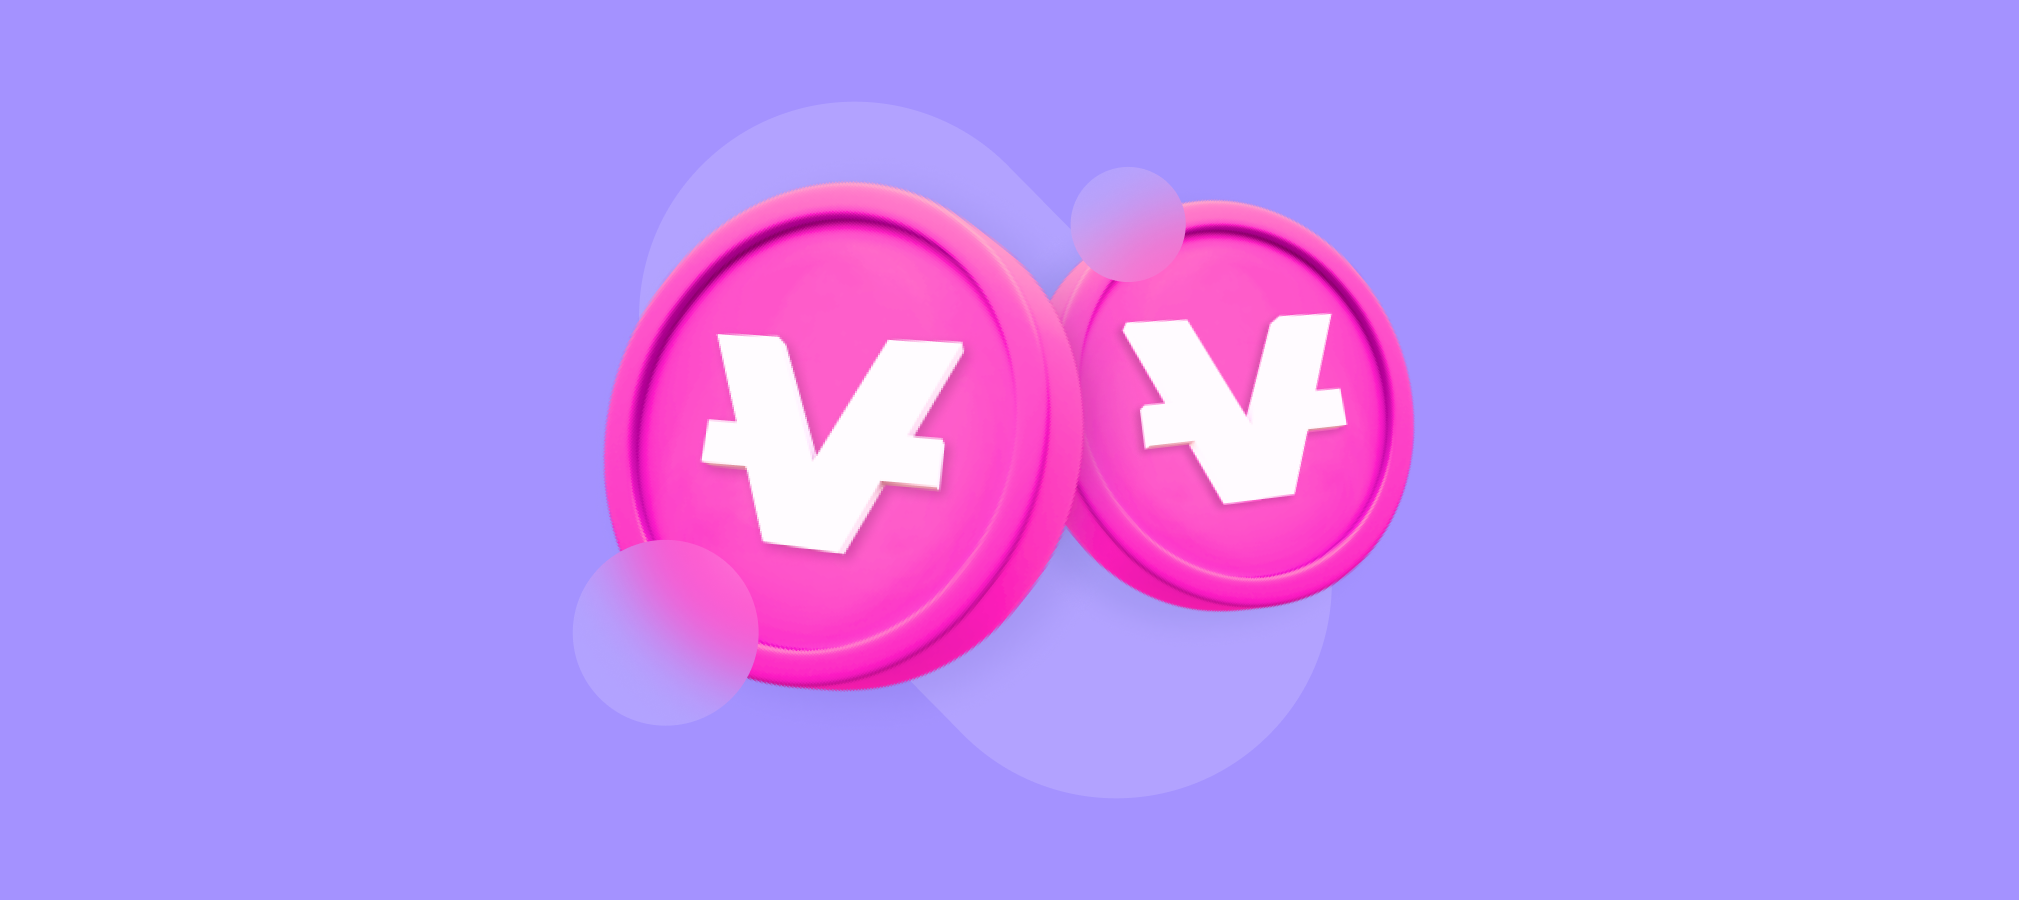 What Is VIDY (VIDY)?